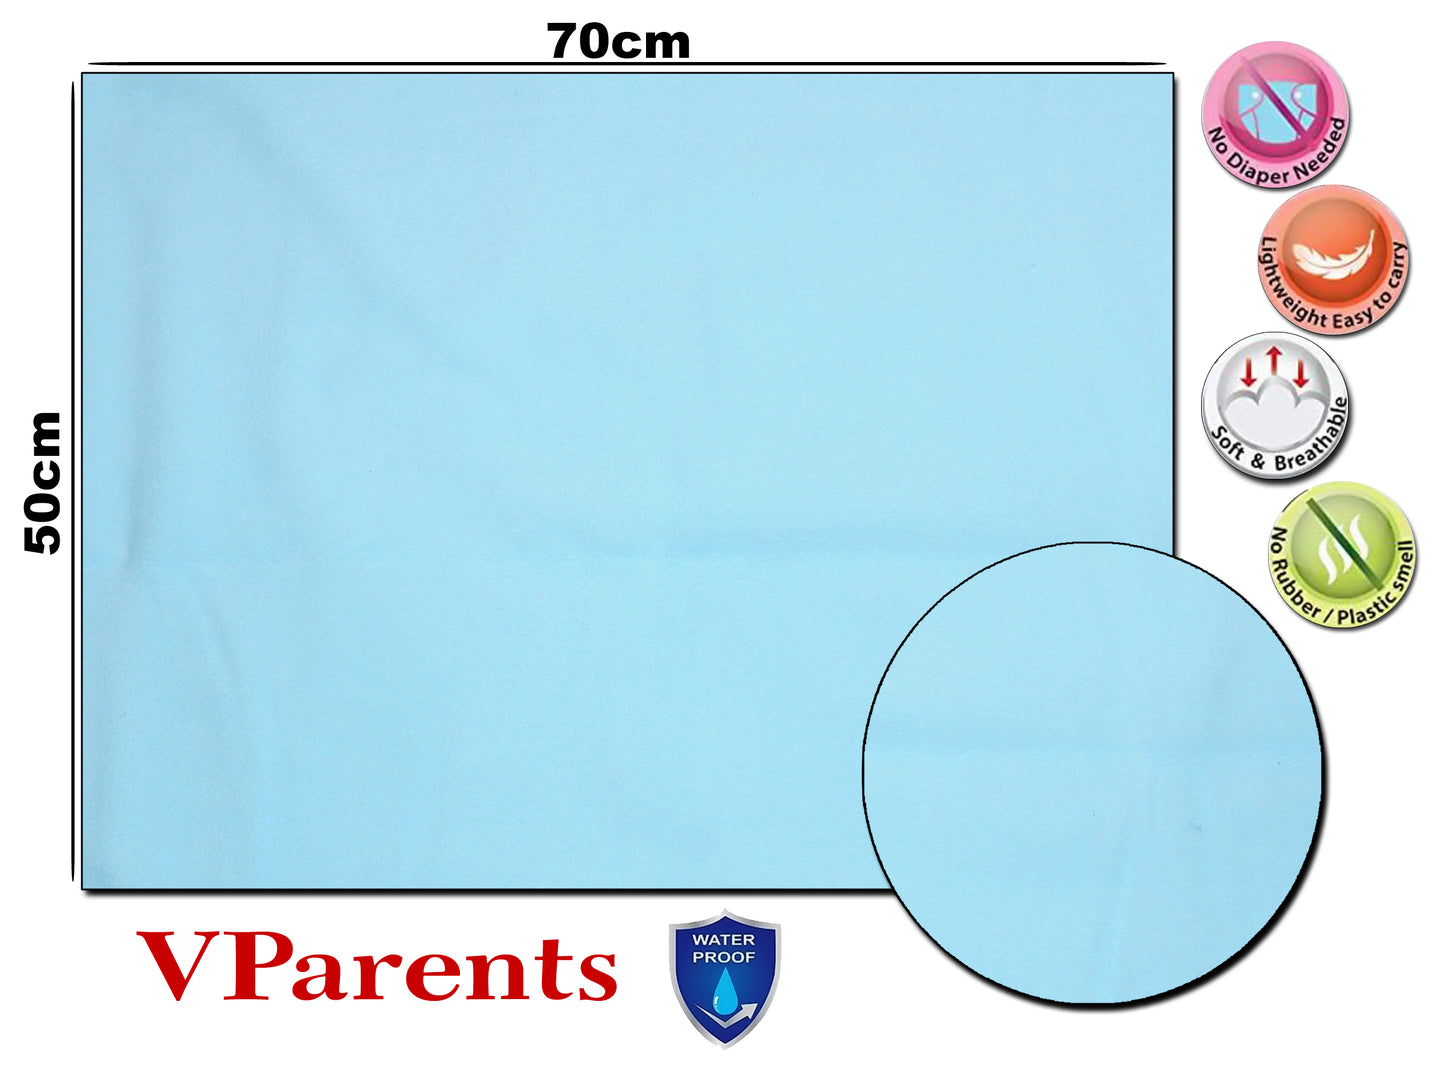 VParents cheeky cheeky  Baby Bedding Set with Pillow and Drysheet Combo